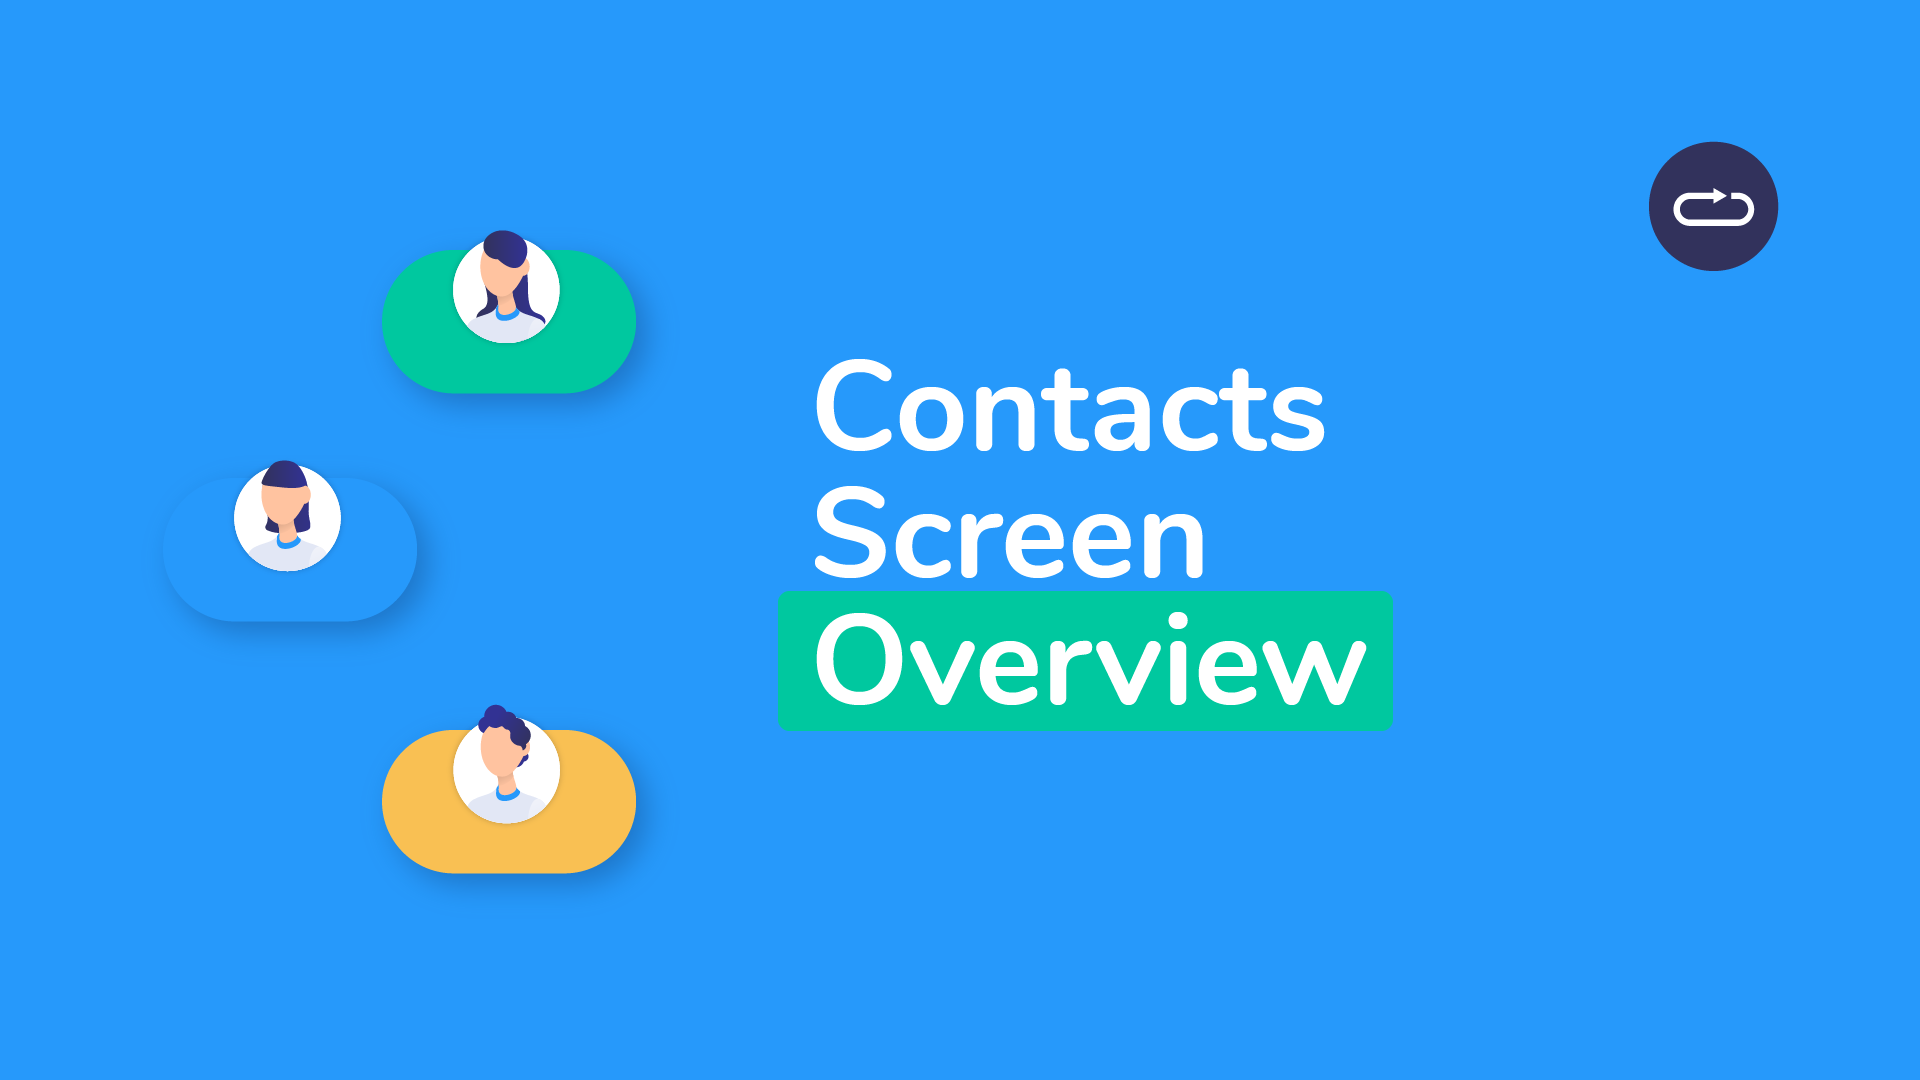 Contacts Screen Overview